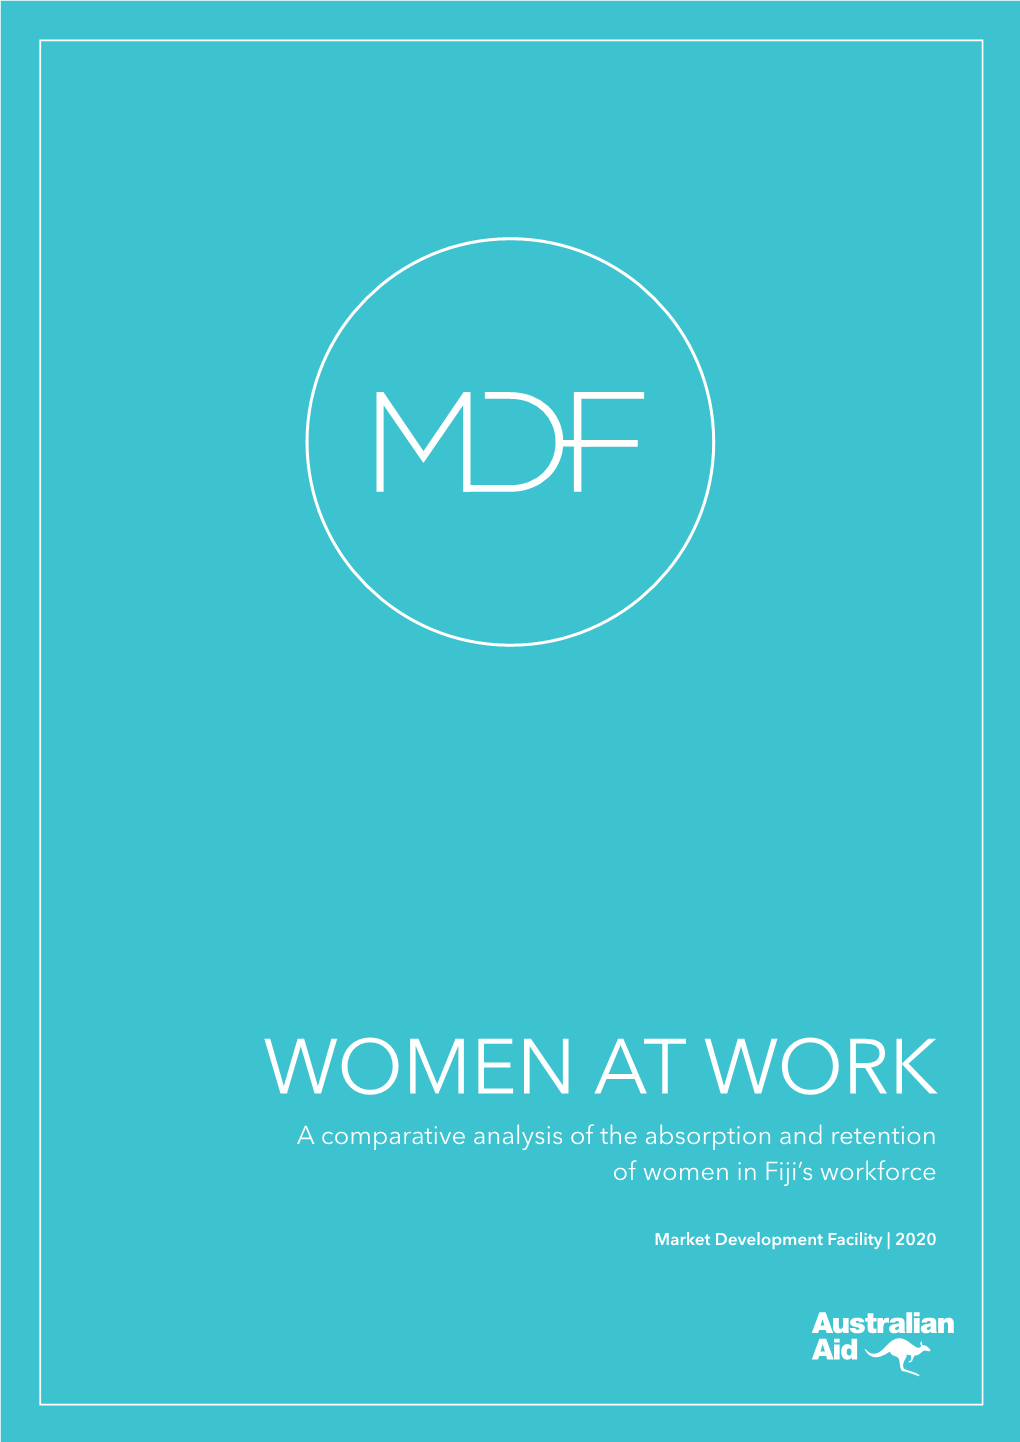 WOMEN at WORK a Comparative Analysis of the Absorption and Retention of Women in Fiji’S Workforce